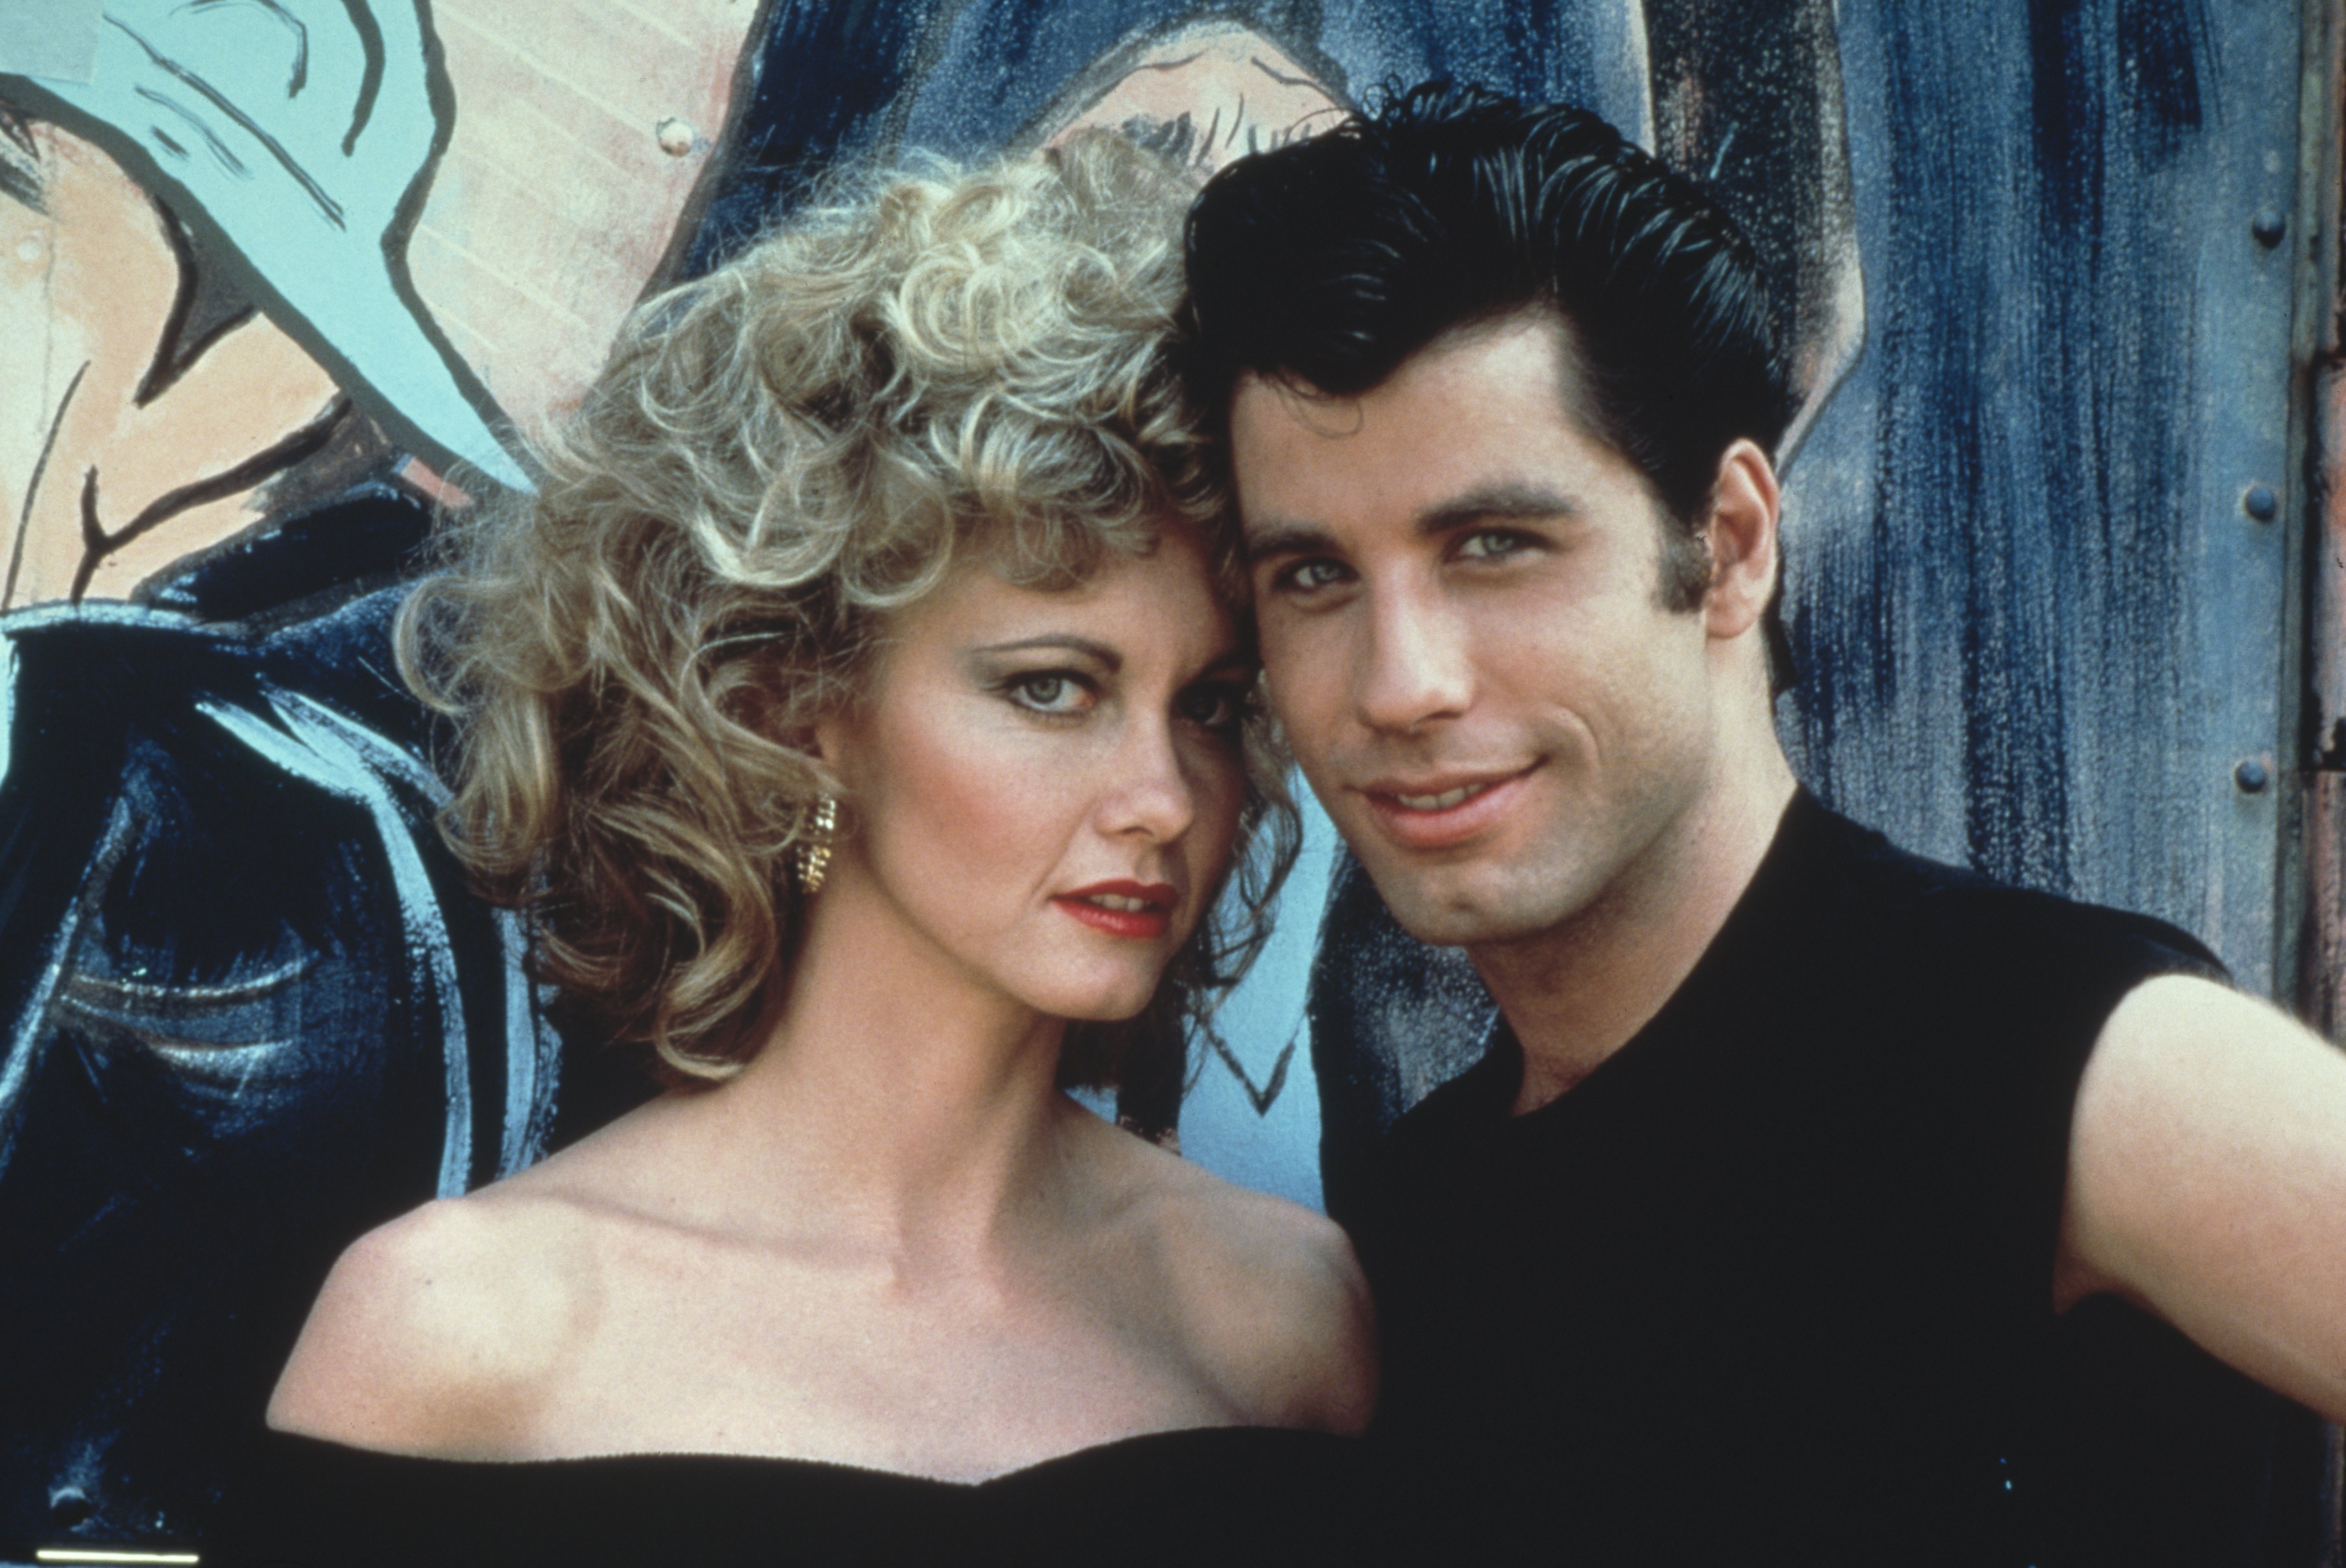 Australian singer and actress Olivia Newton-John and American actor John Travolta in the Paramount film 'Grease', 1978. | Source: Getty Images